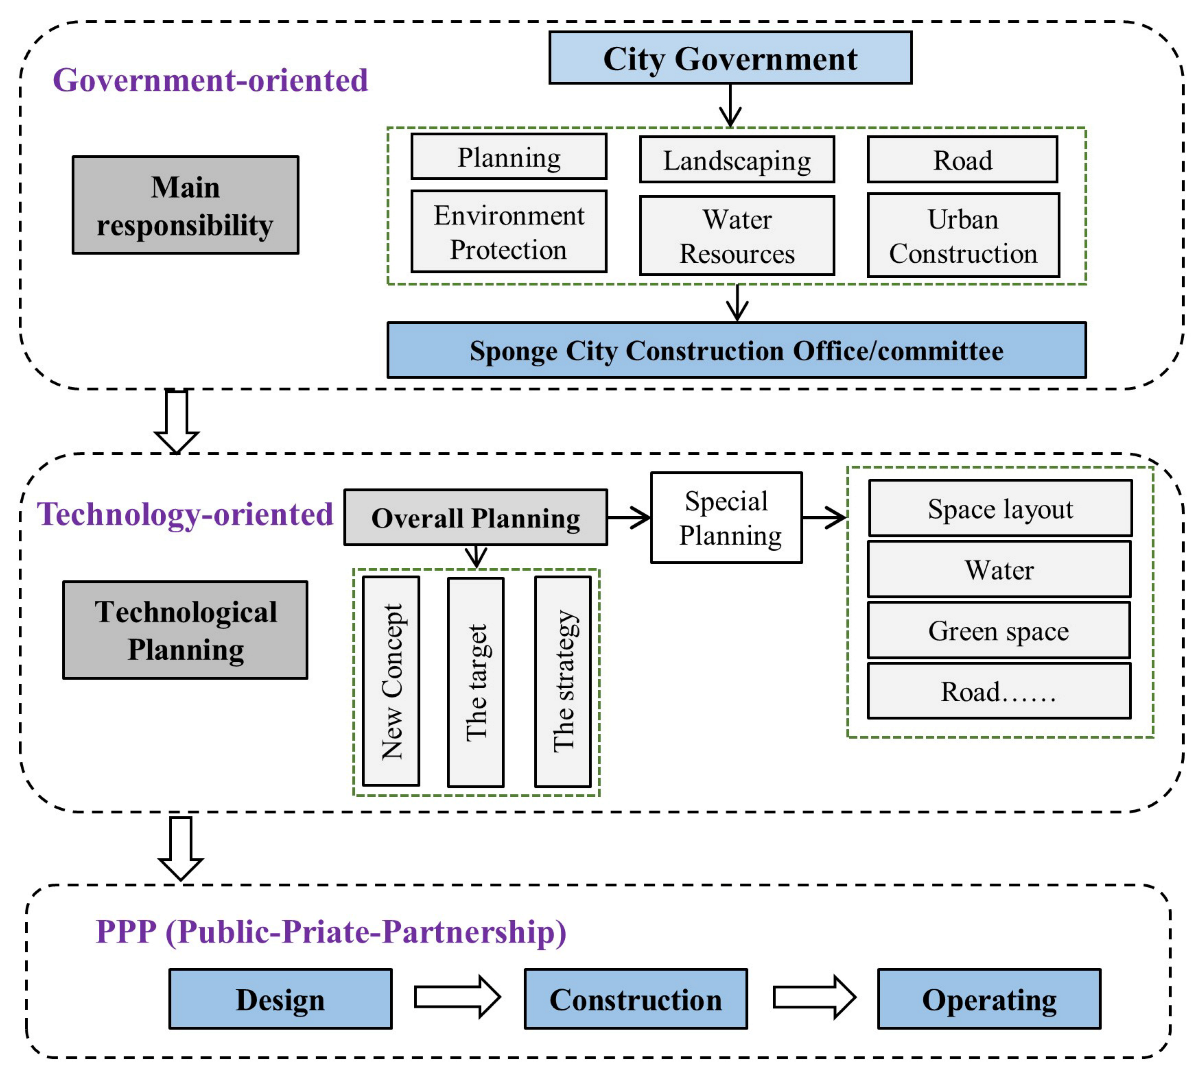 Full article: The Impact of Climate Change on Media Coverage of Sponge City  Programs: A Text Mining and Machine Learning Analysis